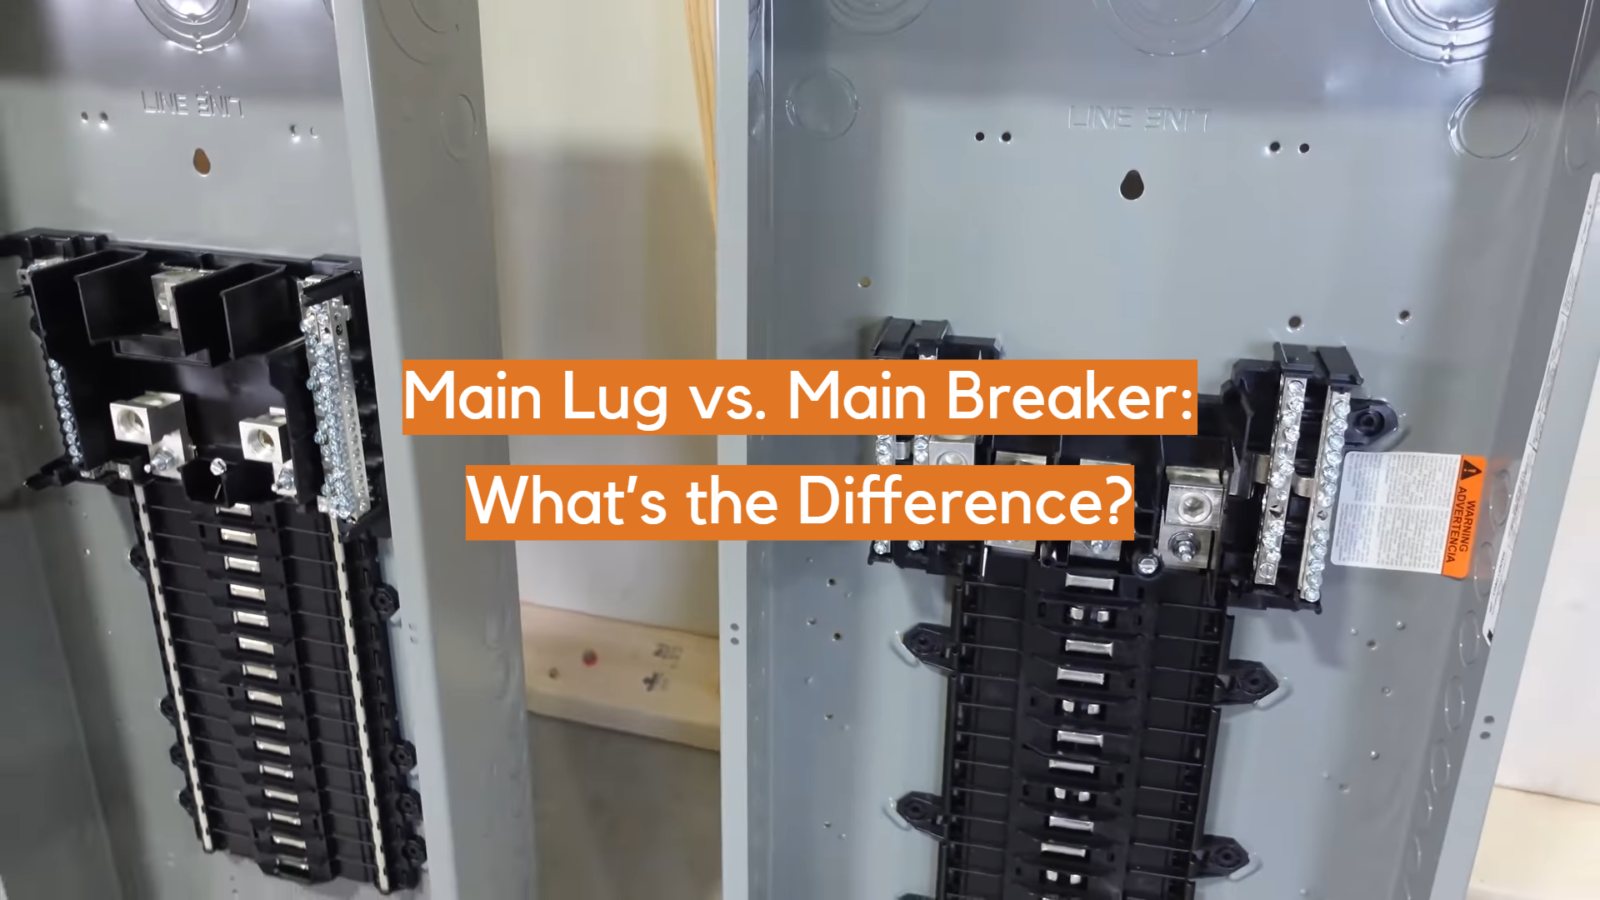 Main Lug vs. Main Breaker: What’s the Difference?